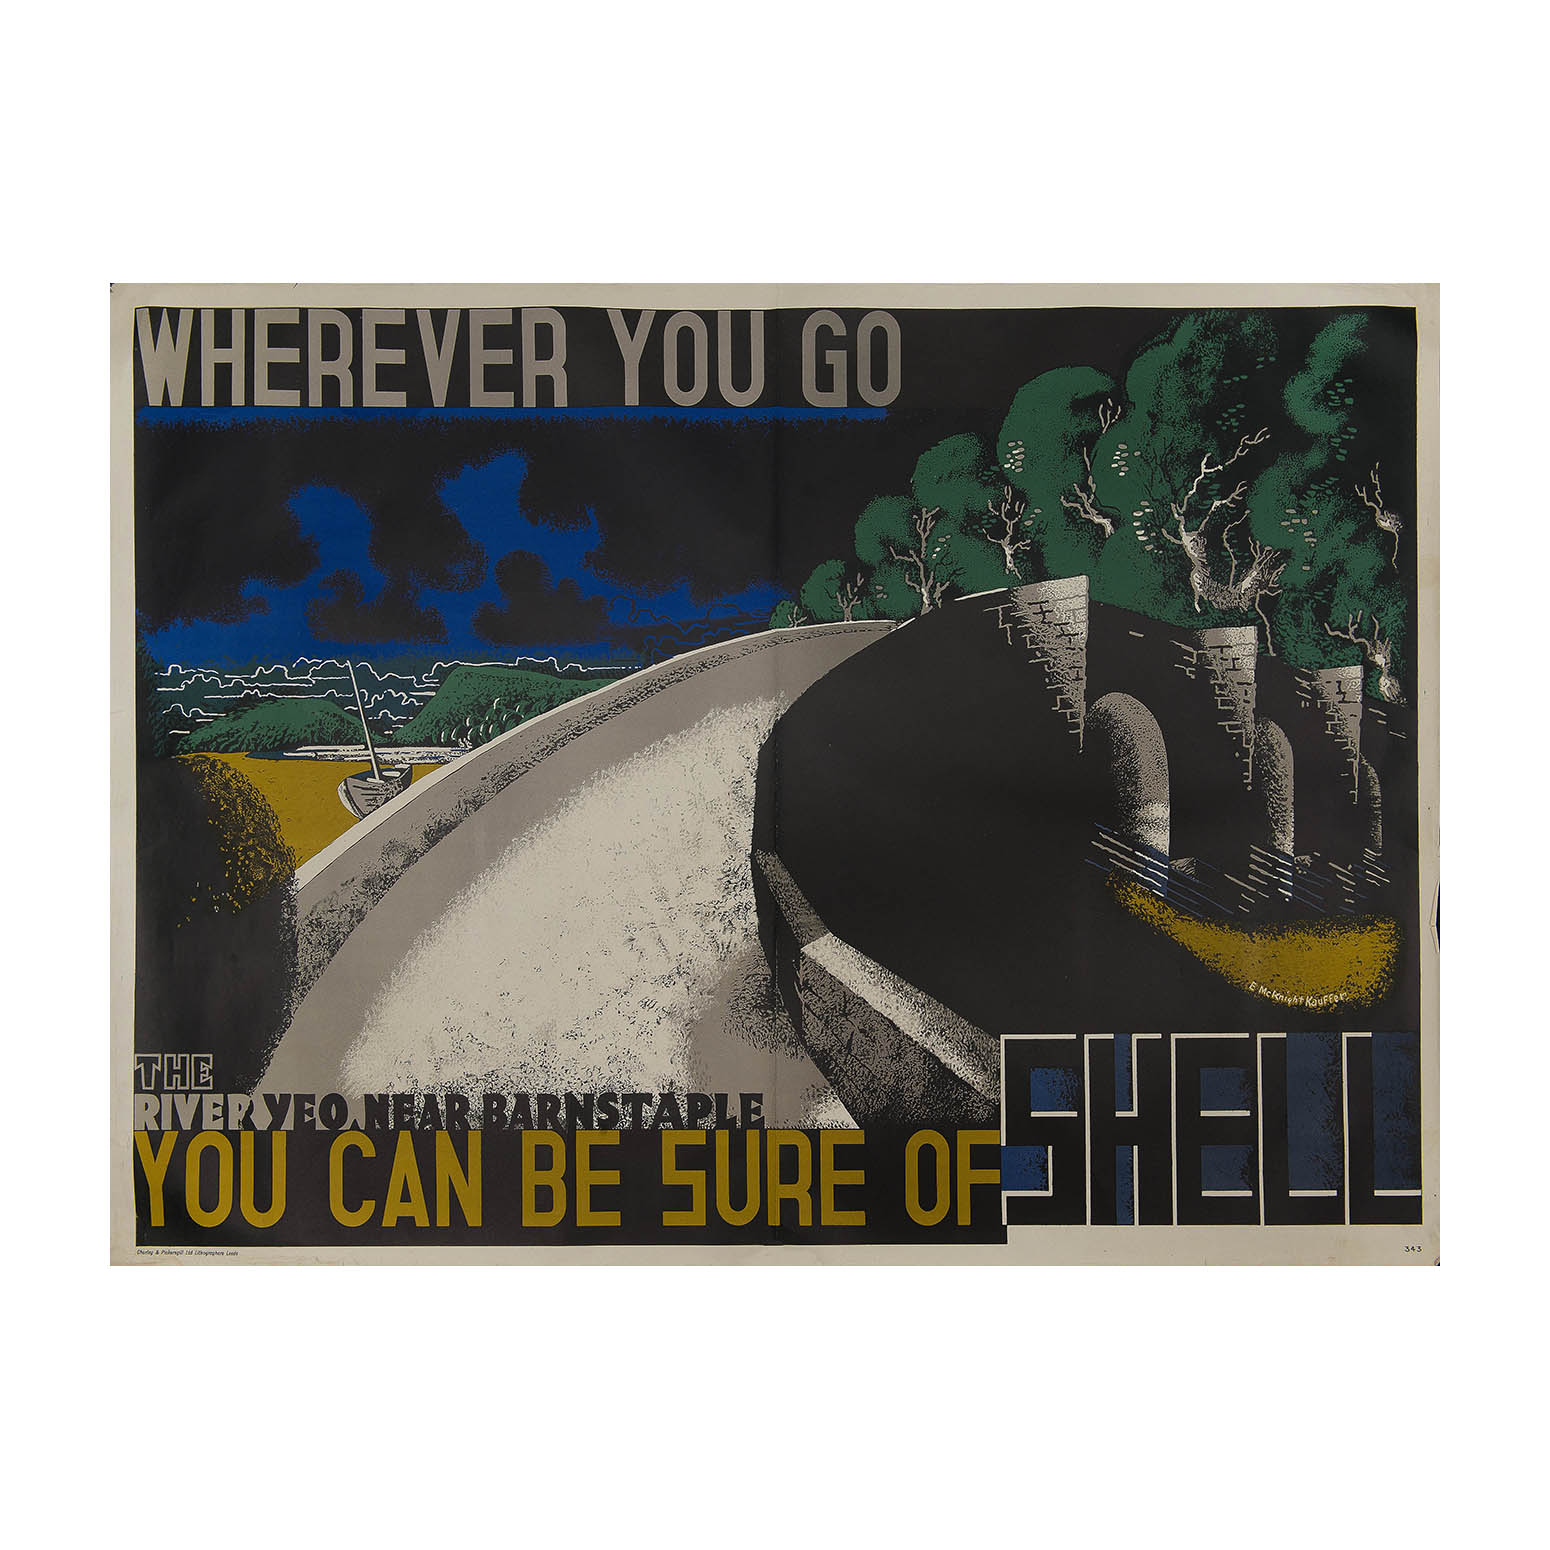 Original poster: The River Yeo Near Barnstaple, Wherever You Go You Can Be Sure of Shell by Edward McKnight Kauffer, 1932. Nocturnal view of bridge crossing over the River Yeo in Devon. ‘neo-Romantic’ & Modernist